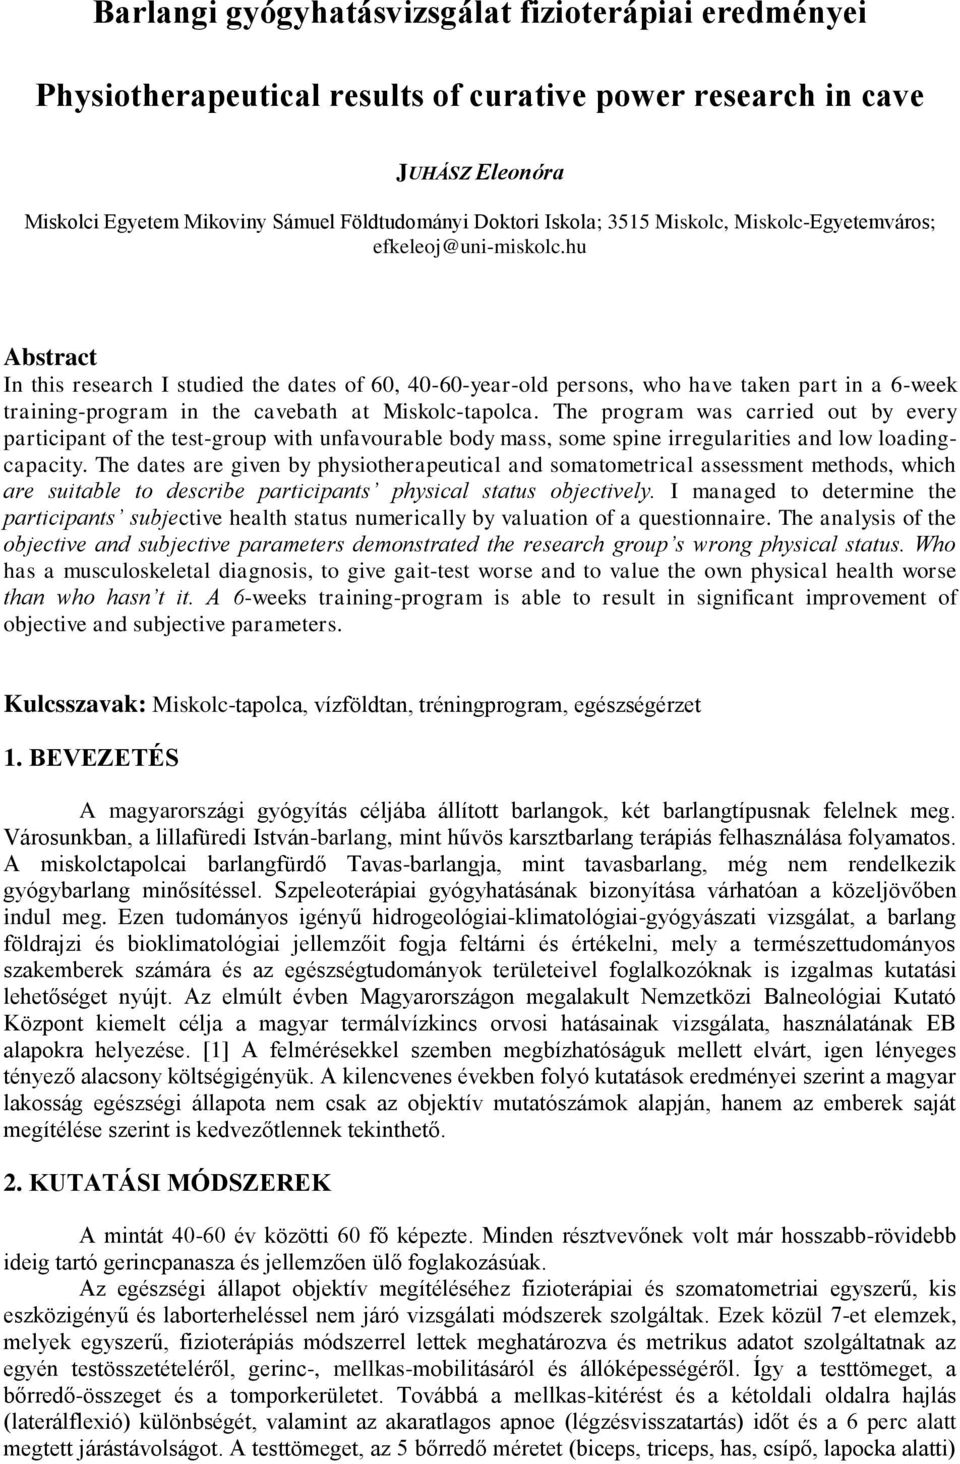 hu Abstract In this research I studied the dates of 60, 40-60-year-old persons, who have taken part in a 6-week training-program in the cavebath at Miskolc-tapolca.